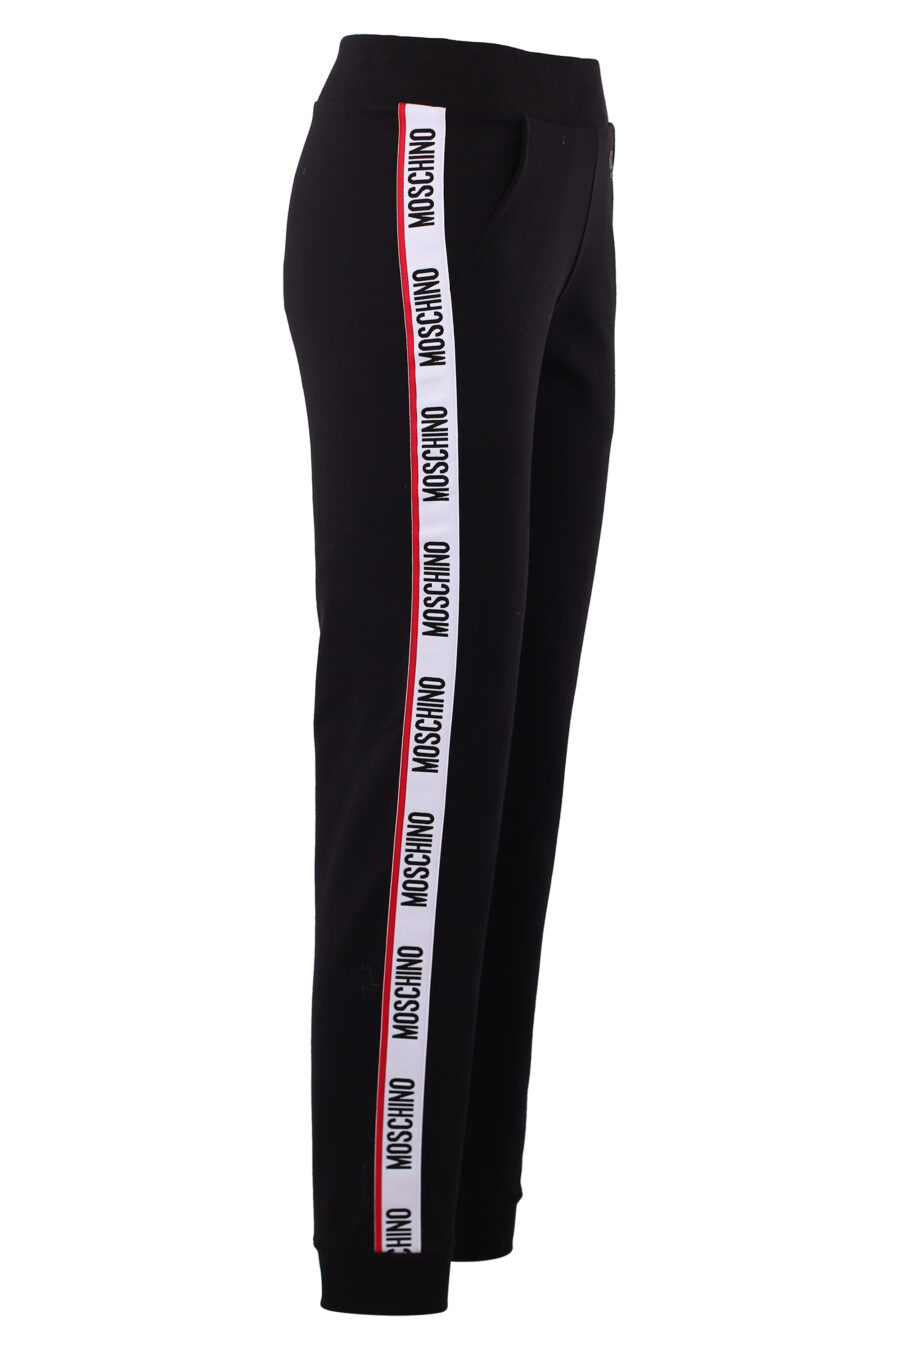 Tracksuit bottoms black with side band logo and black logo - IMG 6281